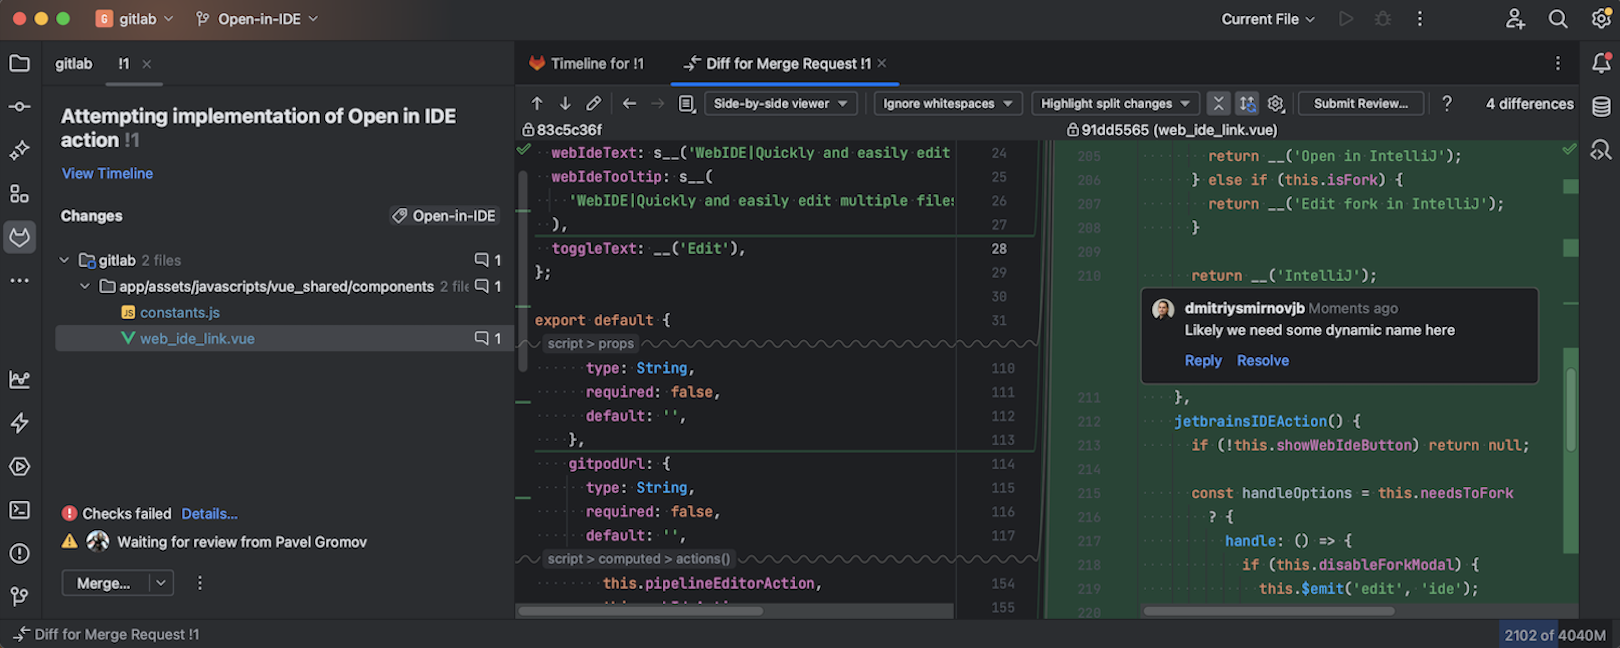 GitLab Merge Request functionality in PyCharm